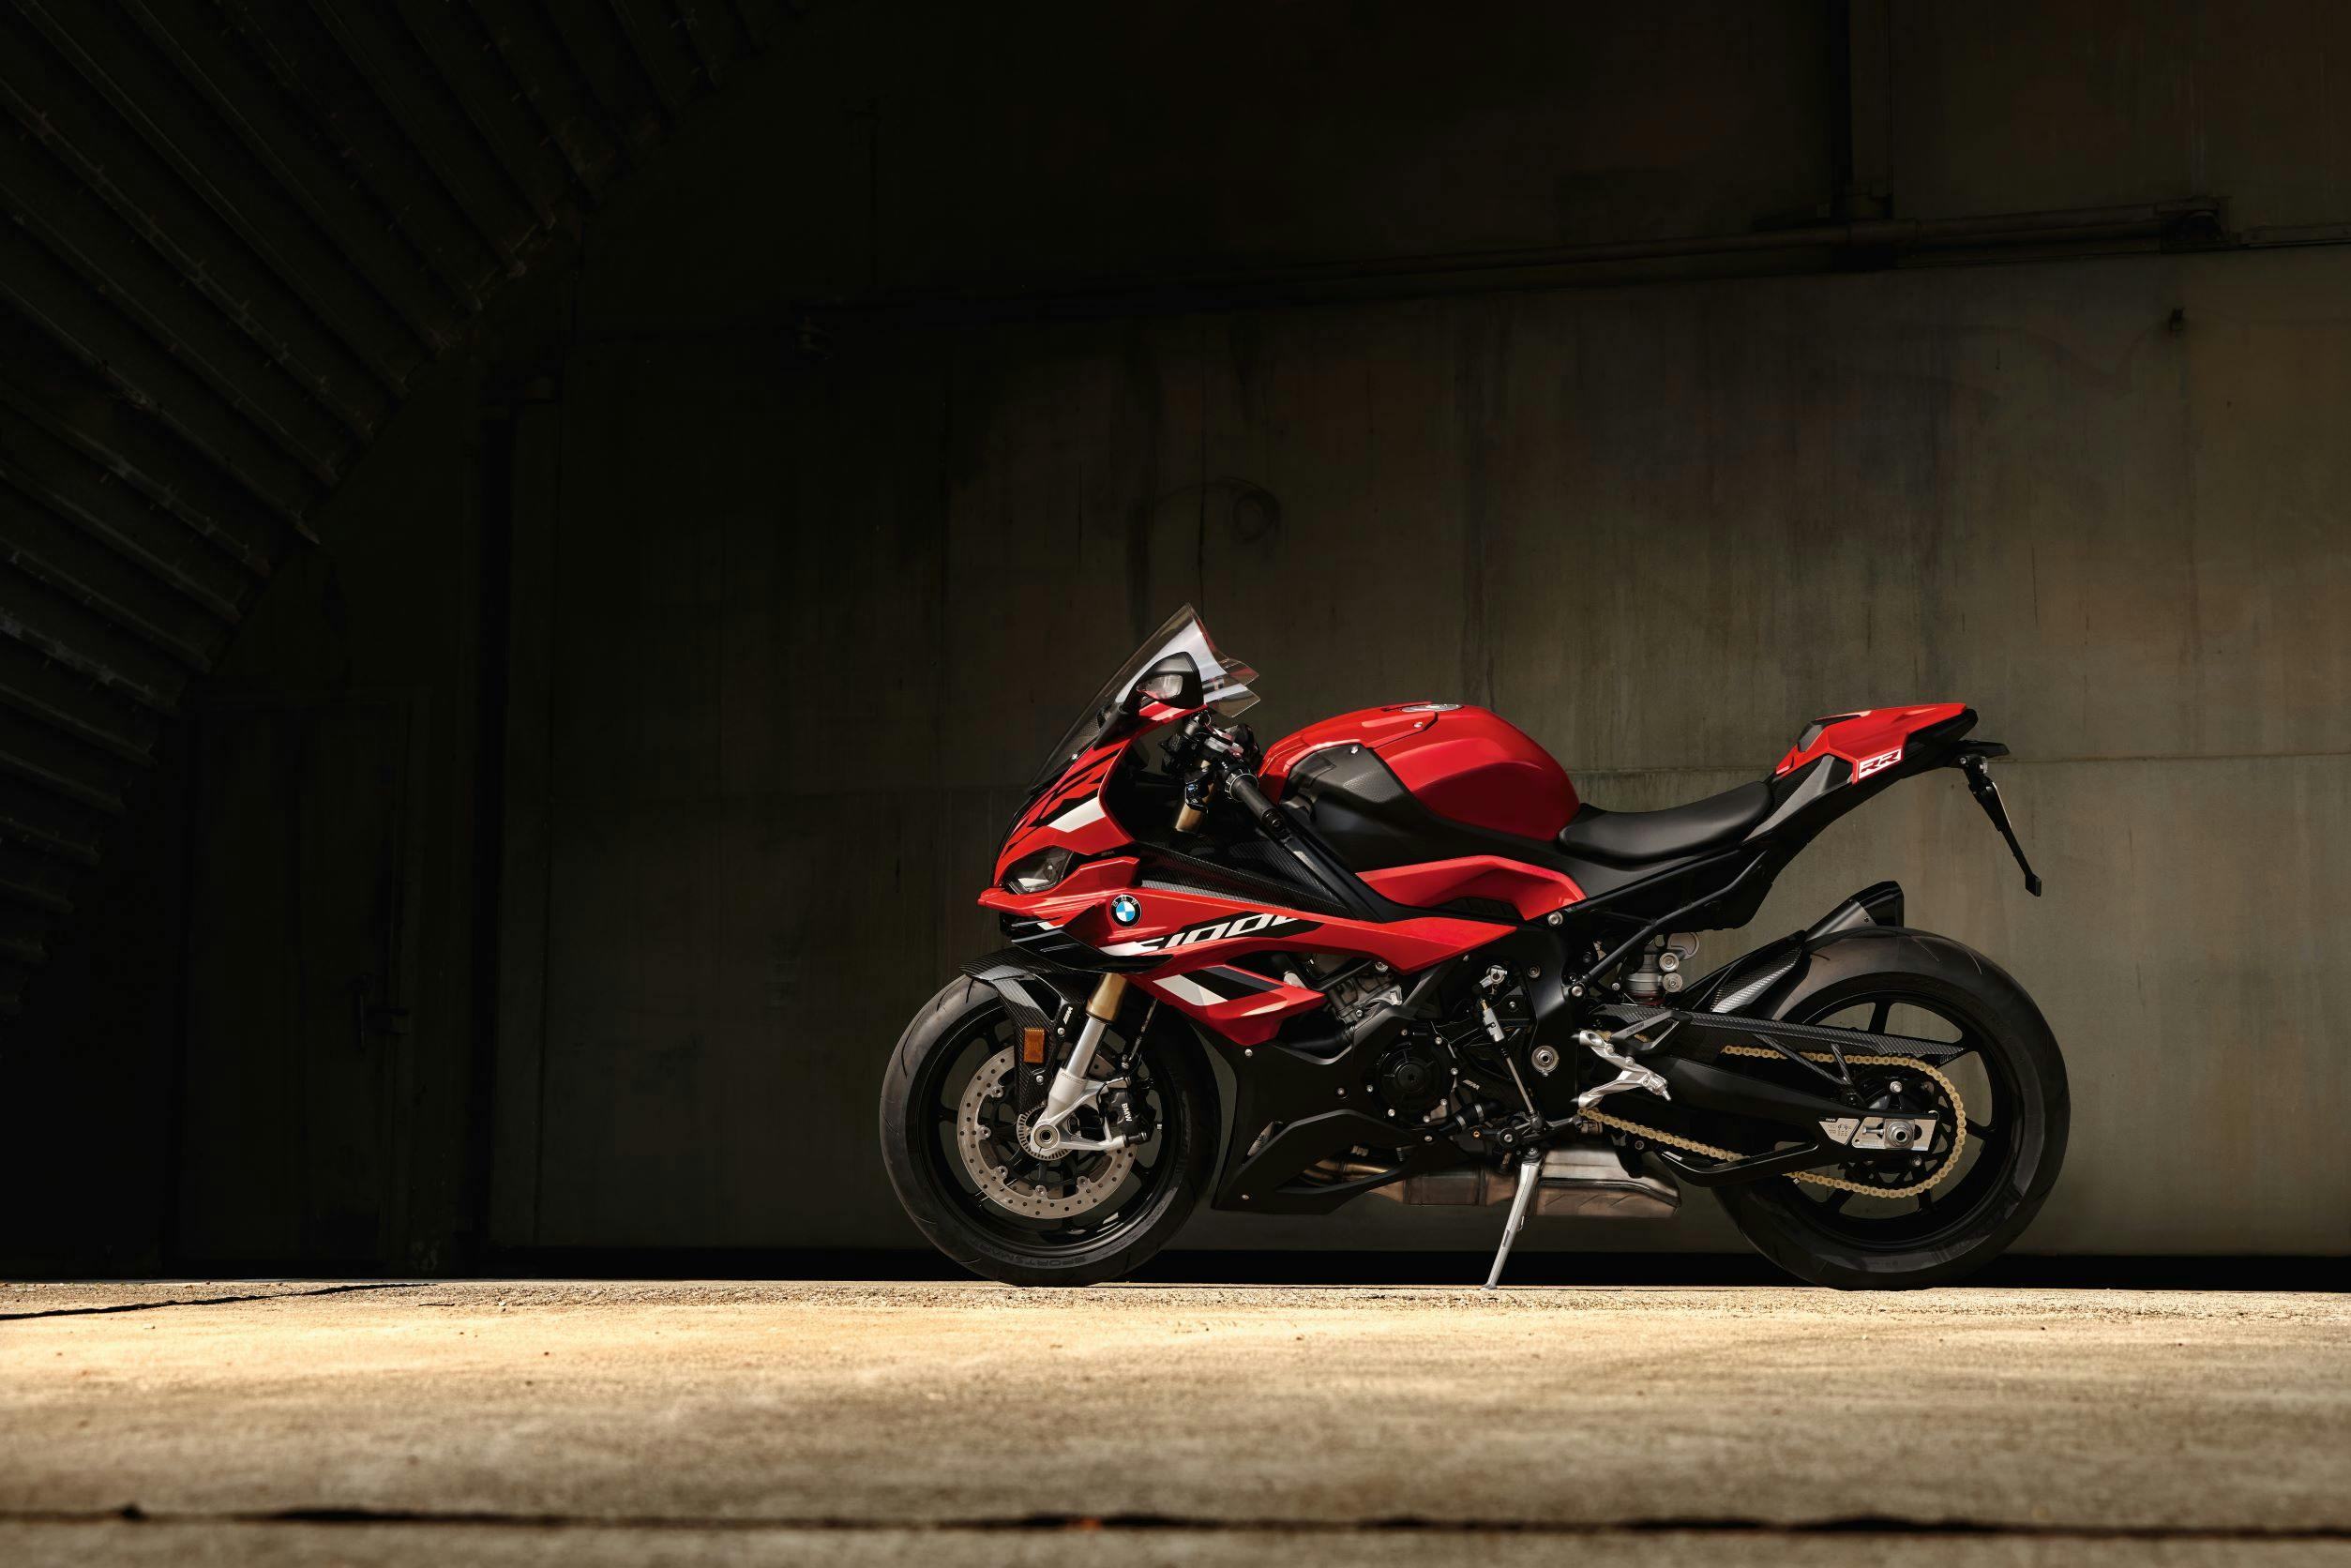 BMW S 1000 RR Sport in racing red colour, parked.